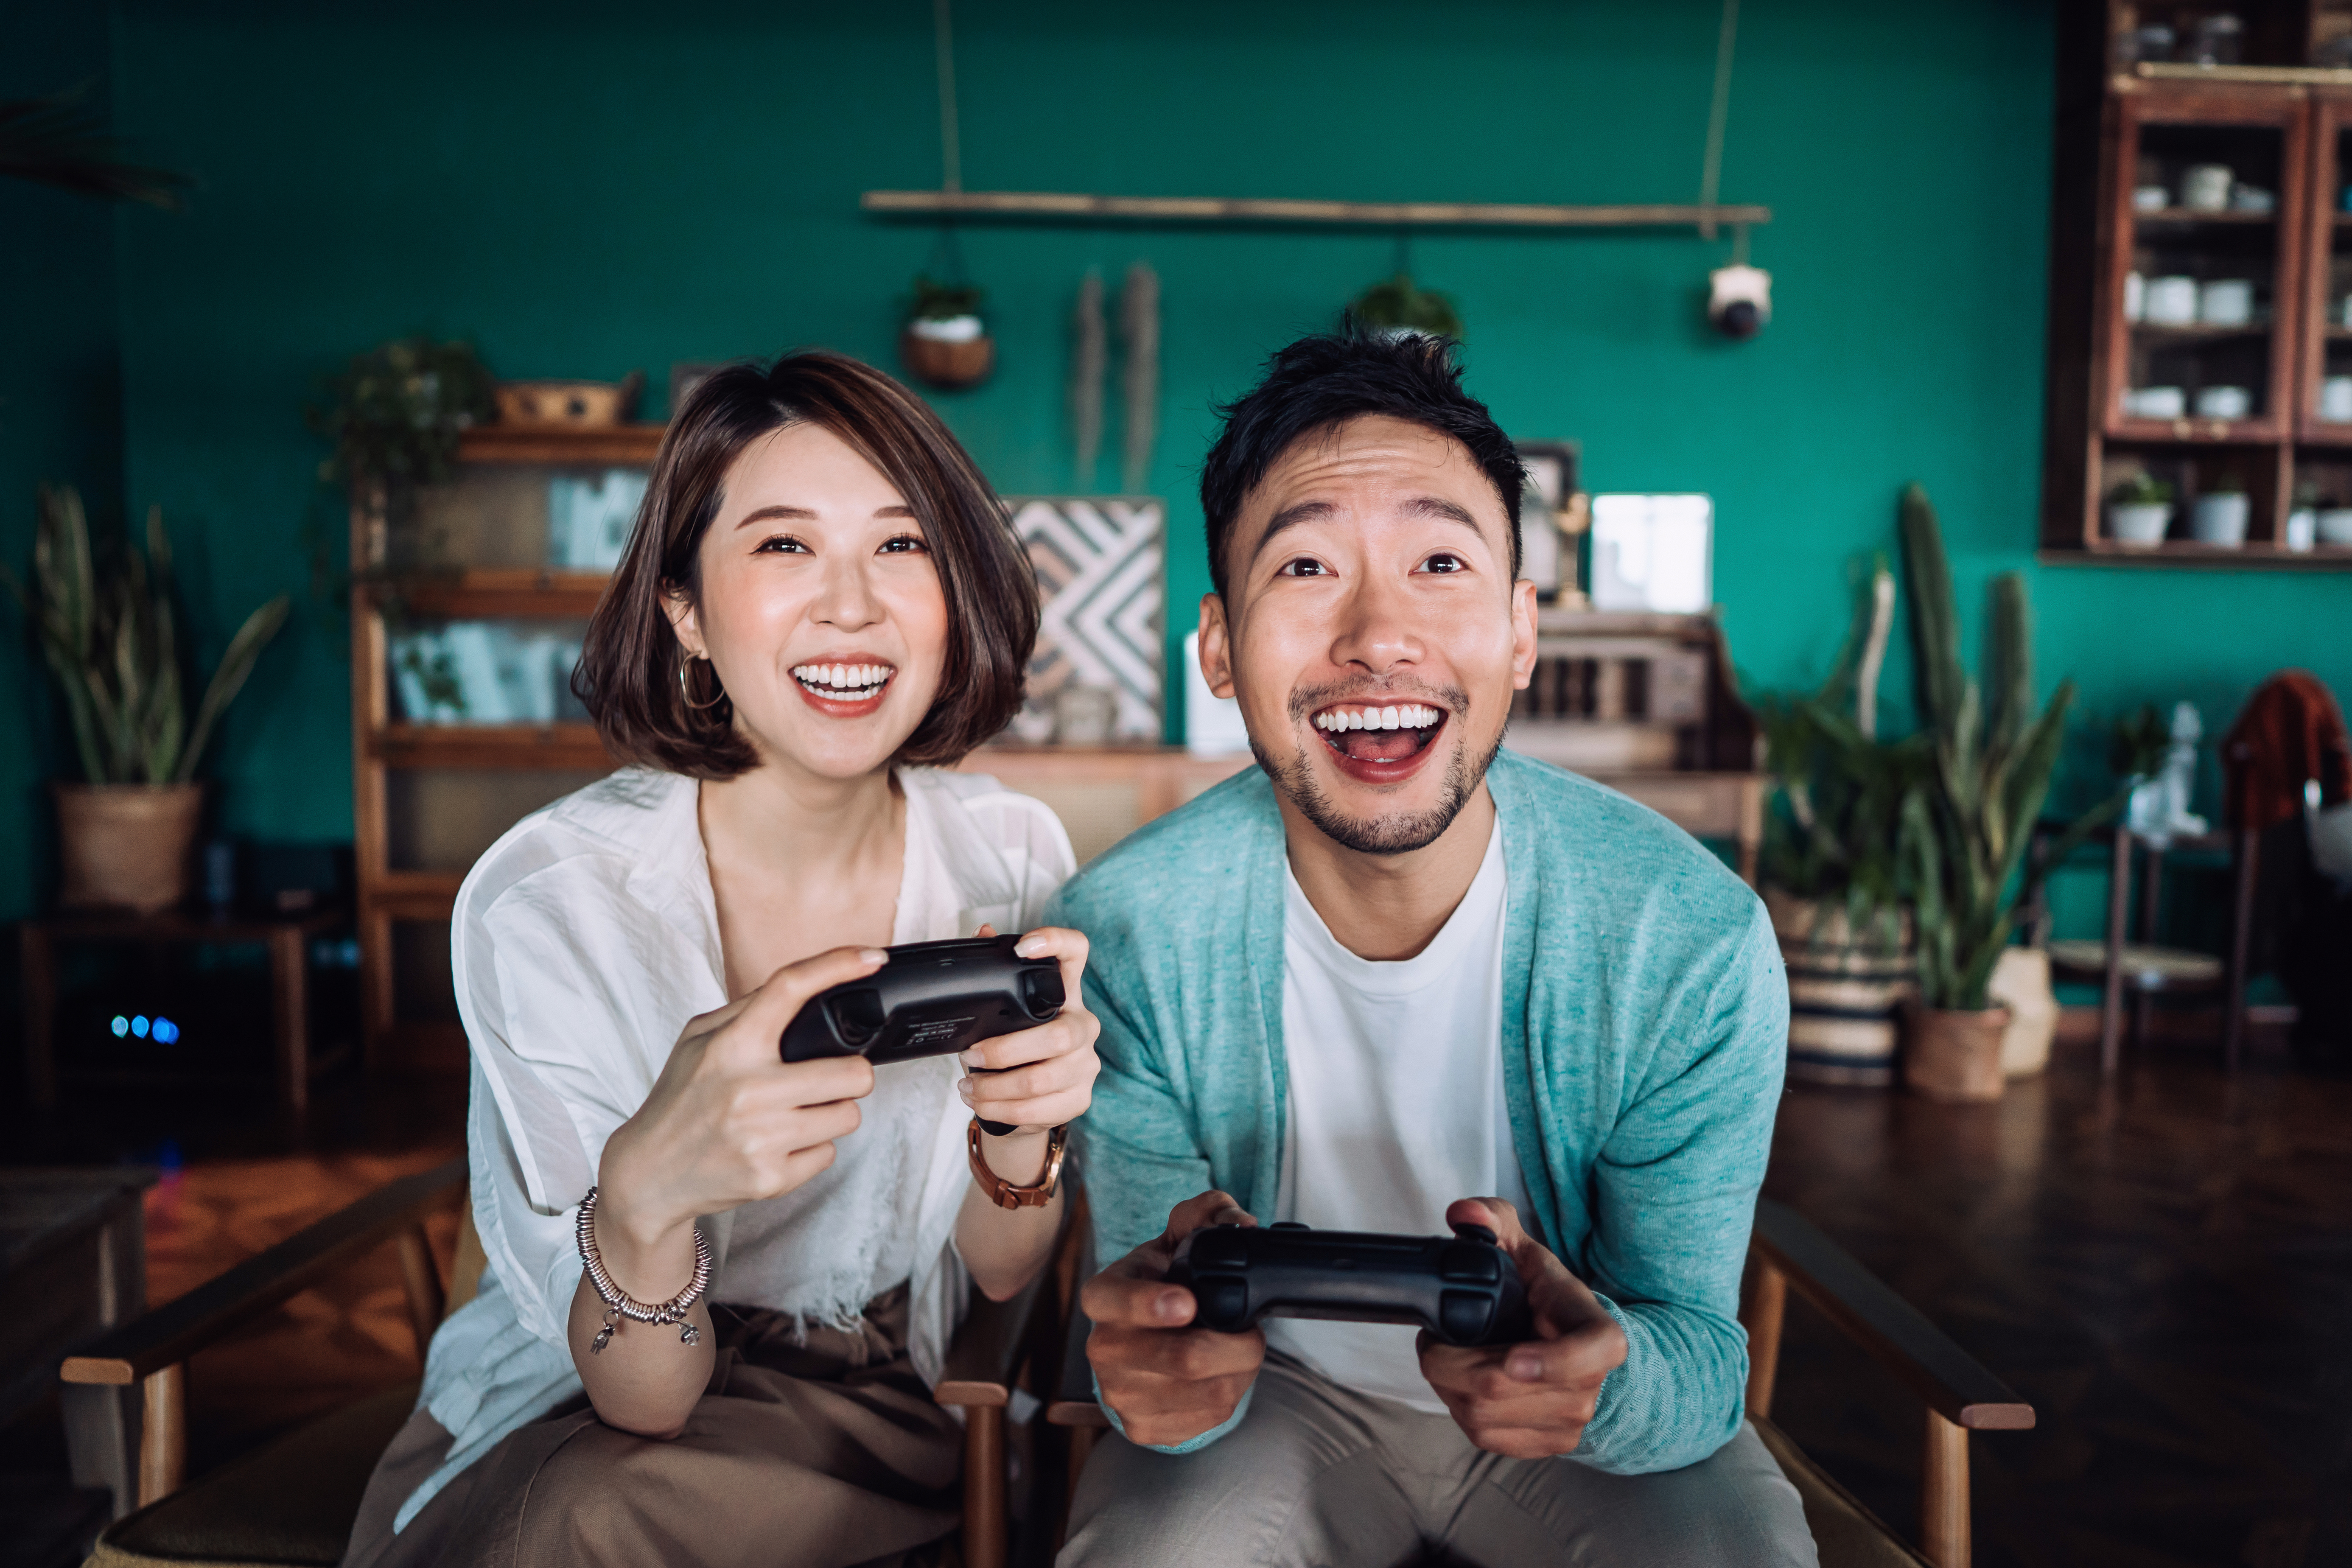 How To Meet Girls Who Are Interested In Gaming As A Pastime Activity?